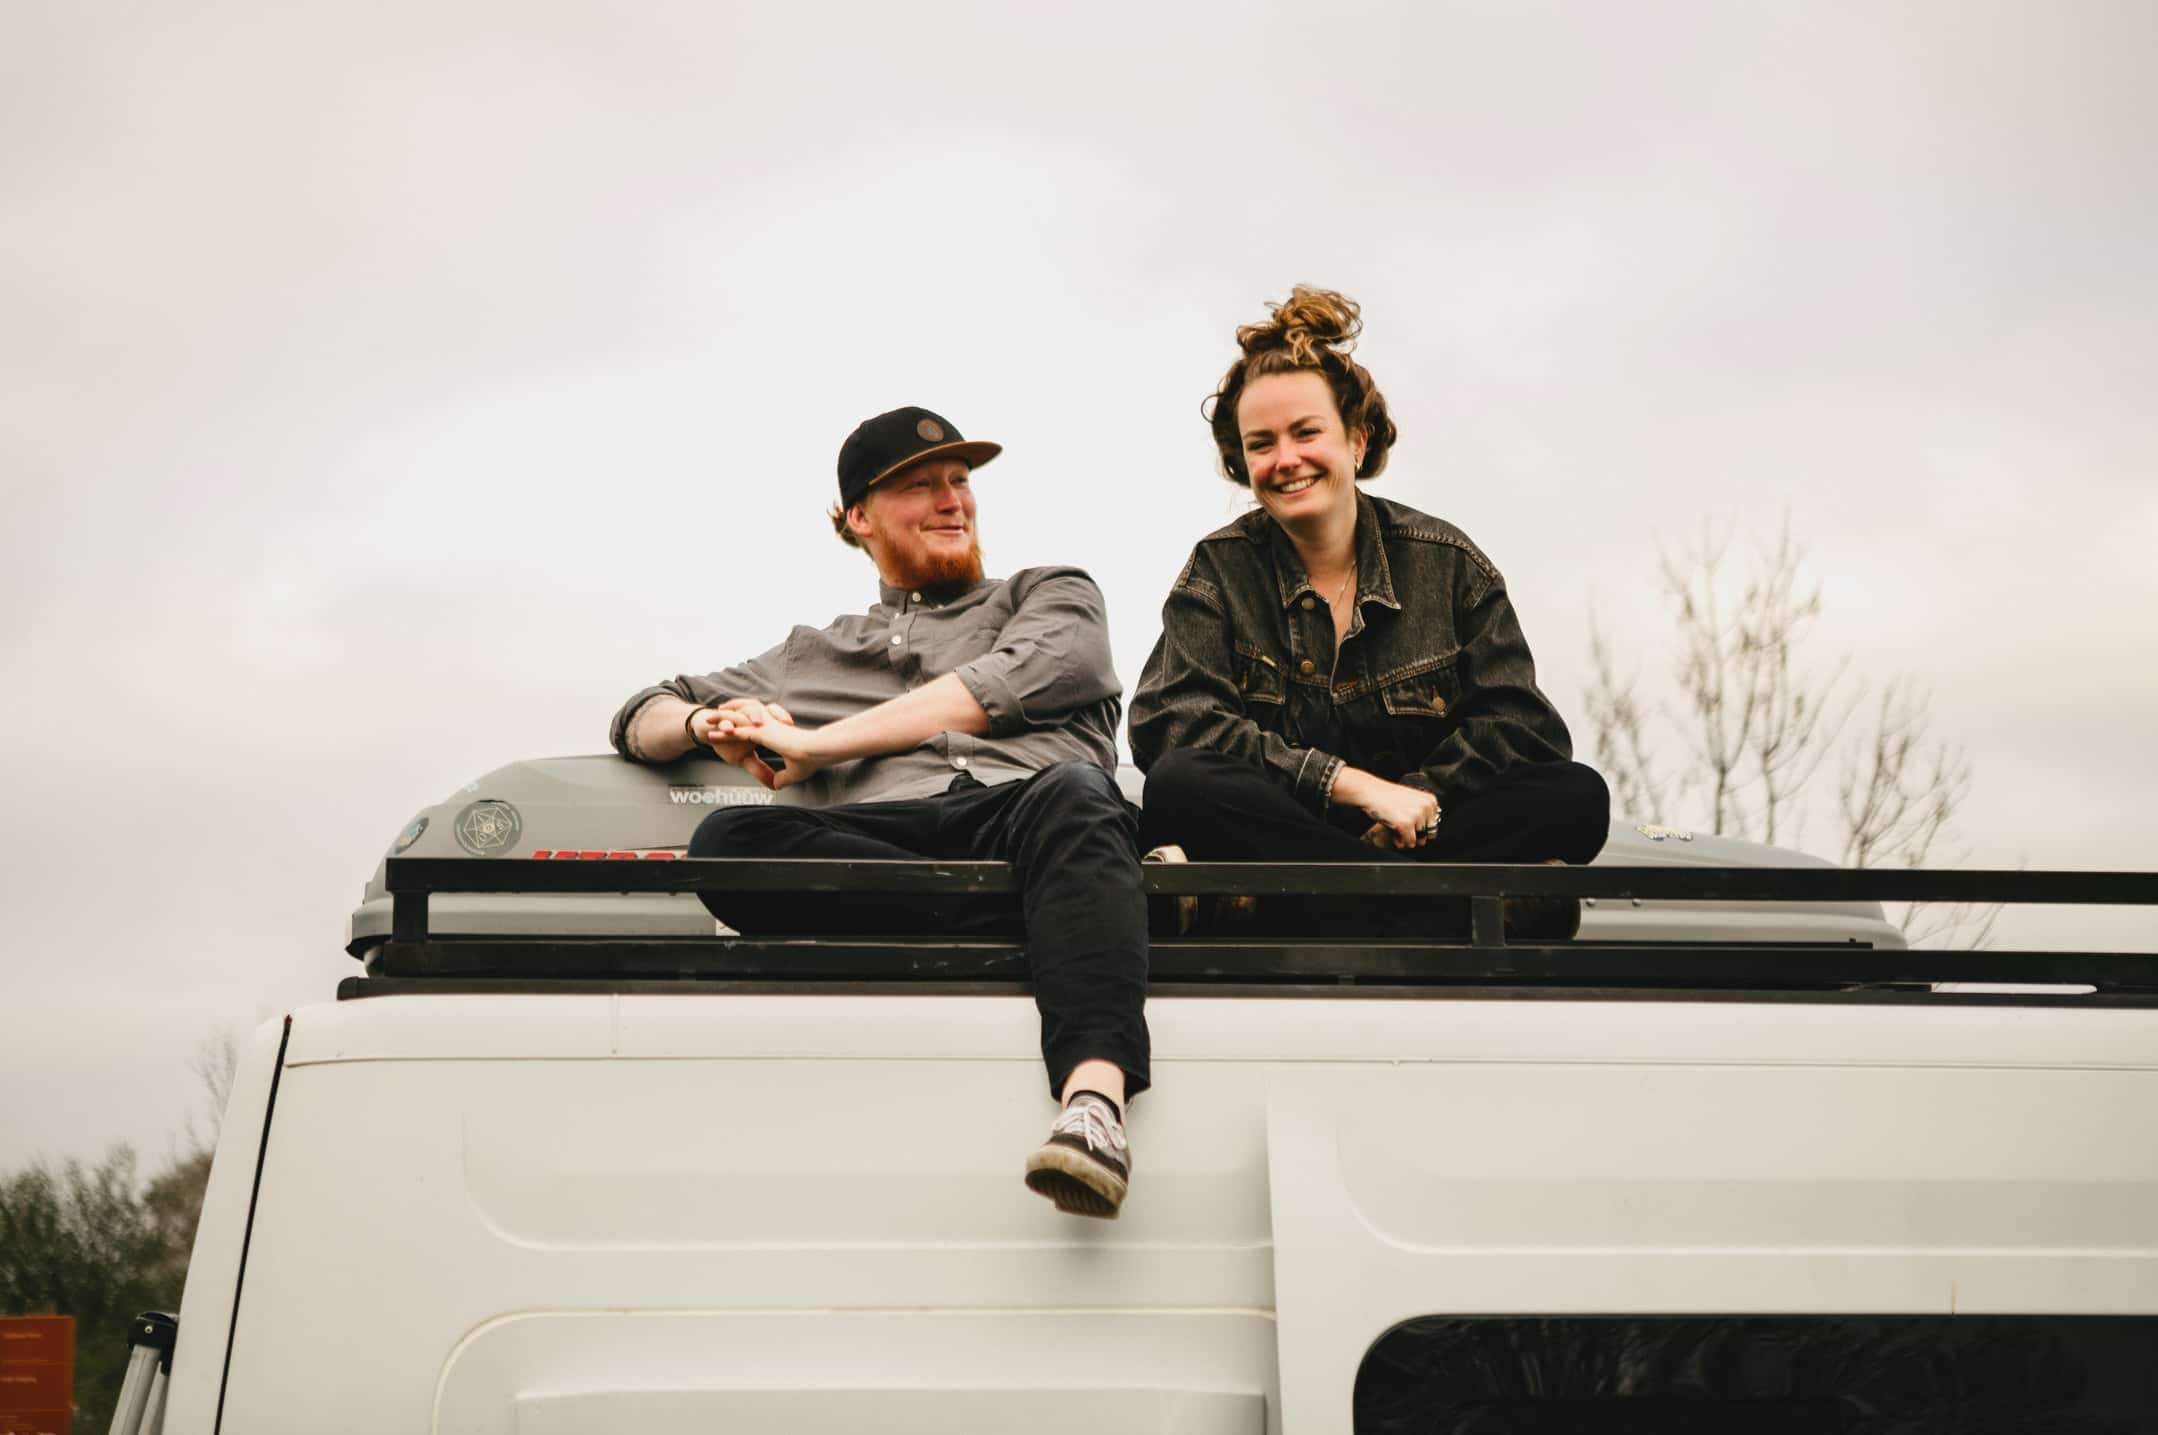 VANLIFE - Robin and Jenn have been living in their van for three years